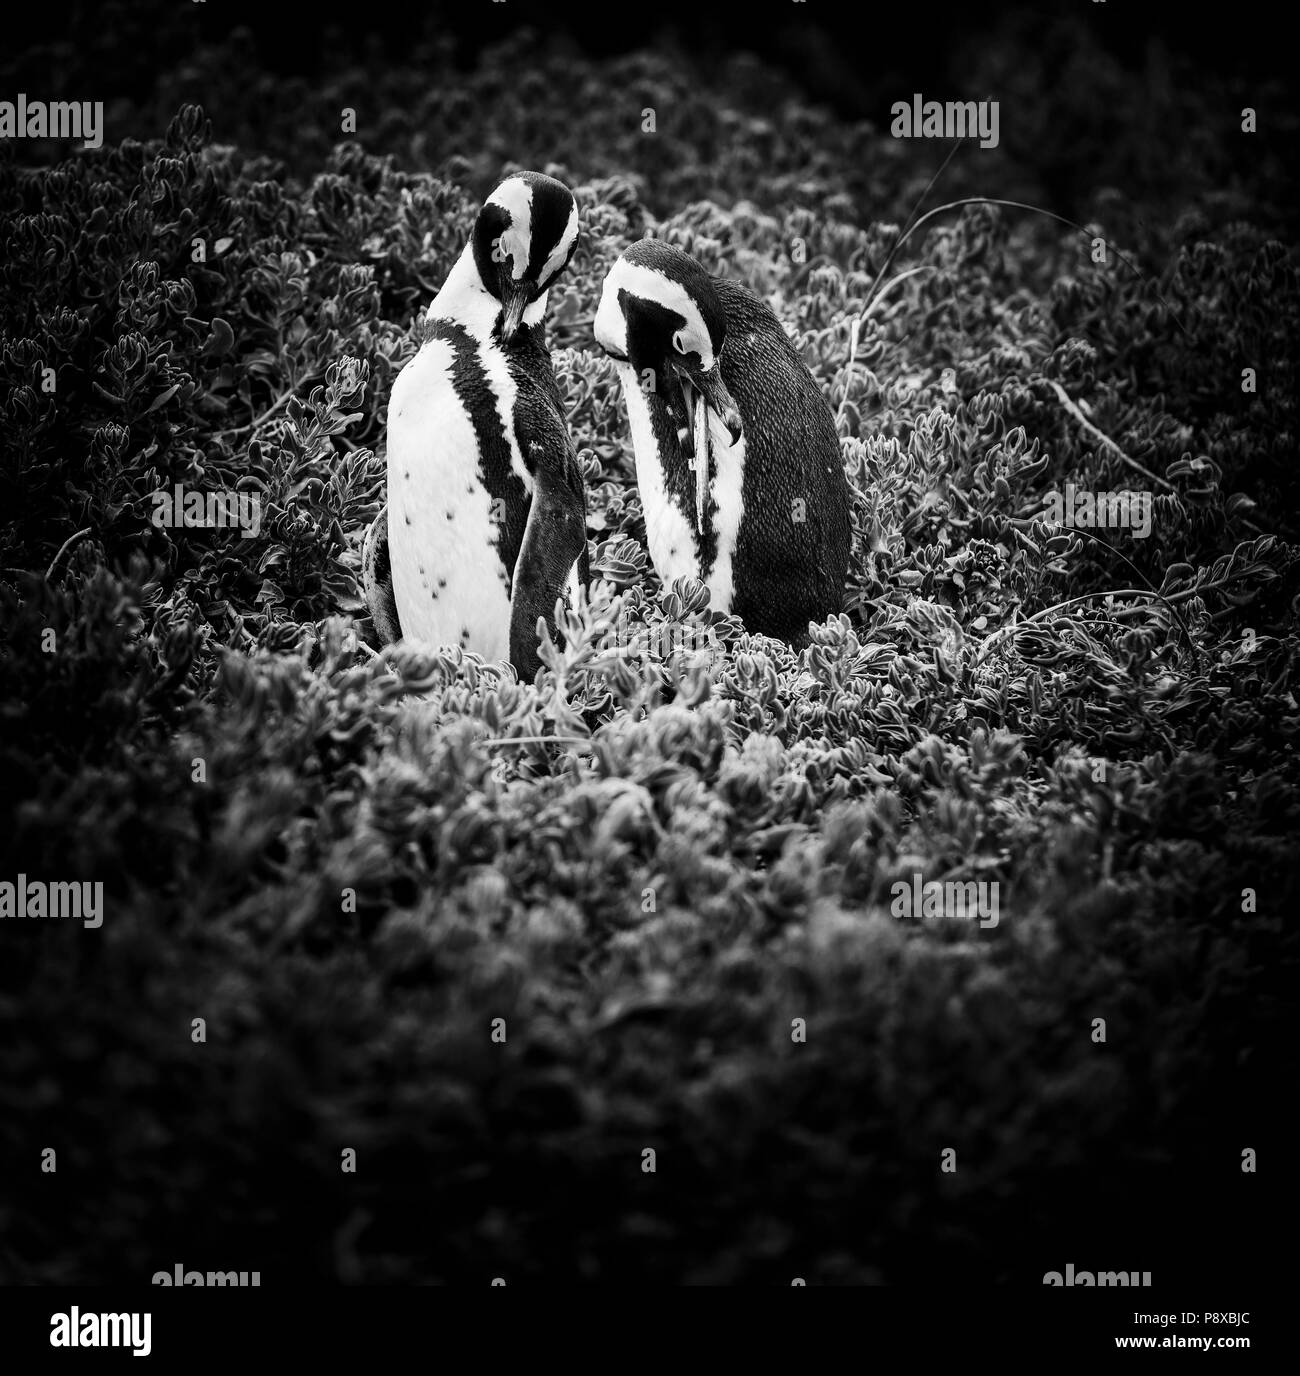 An African Penguin couple (spheniscus demersus) in South Africa in black and white Stock Photo